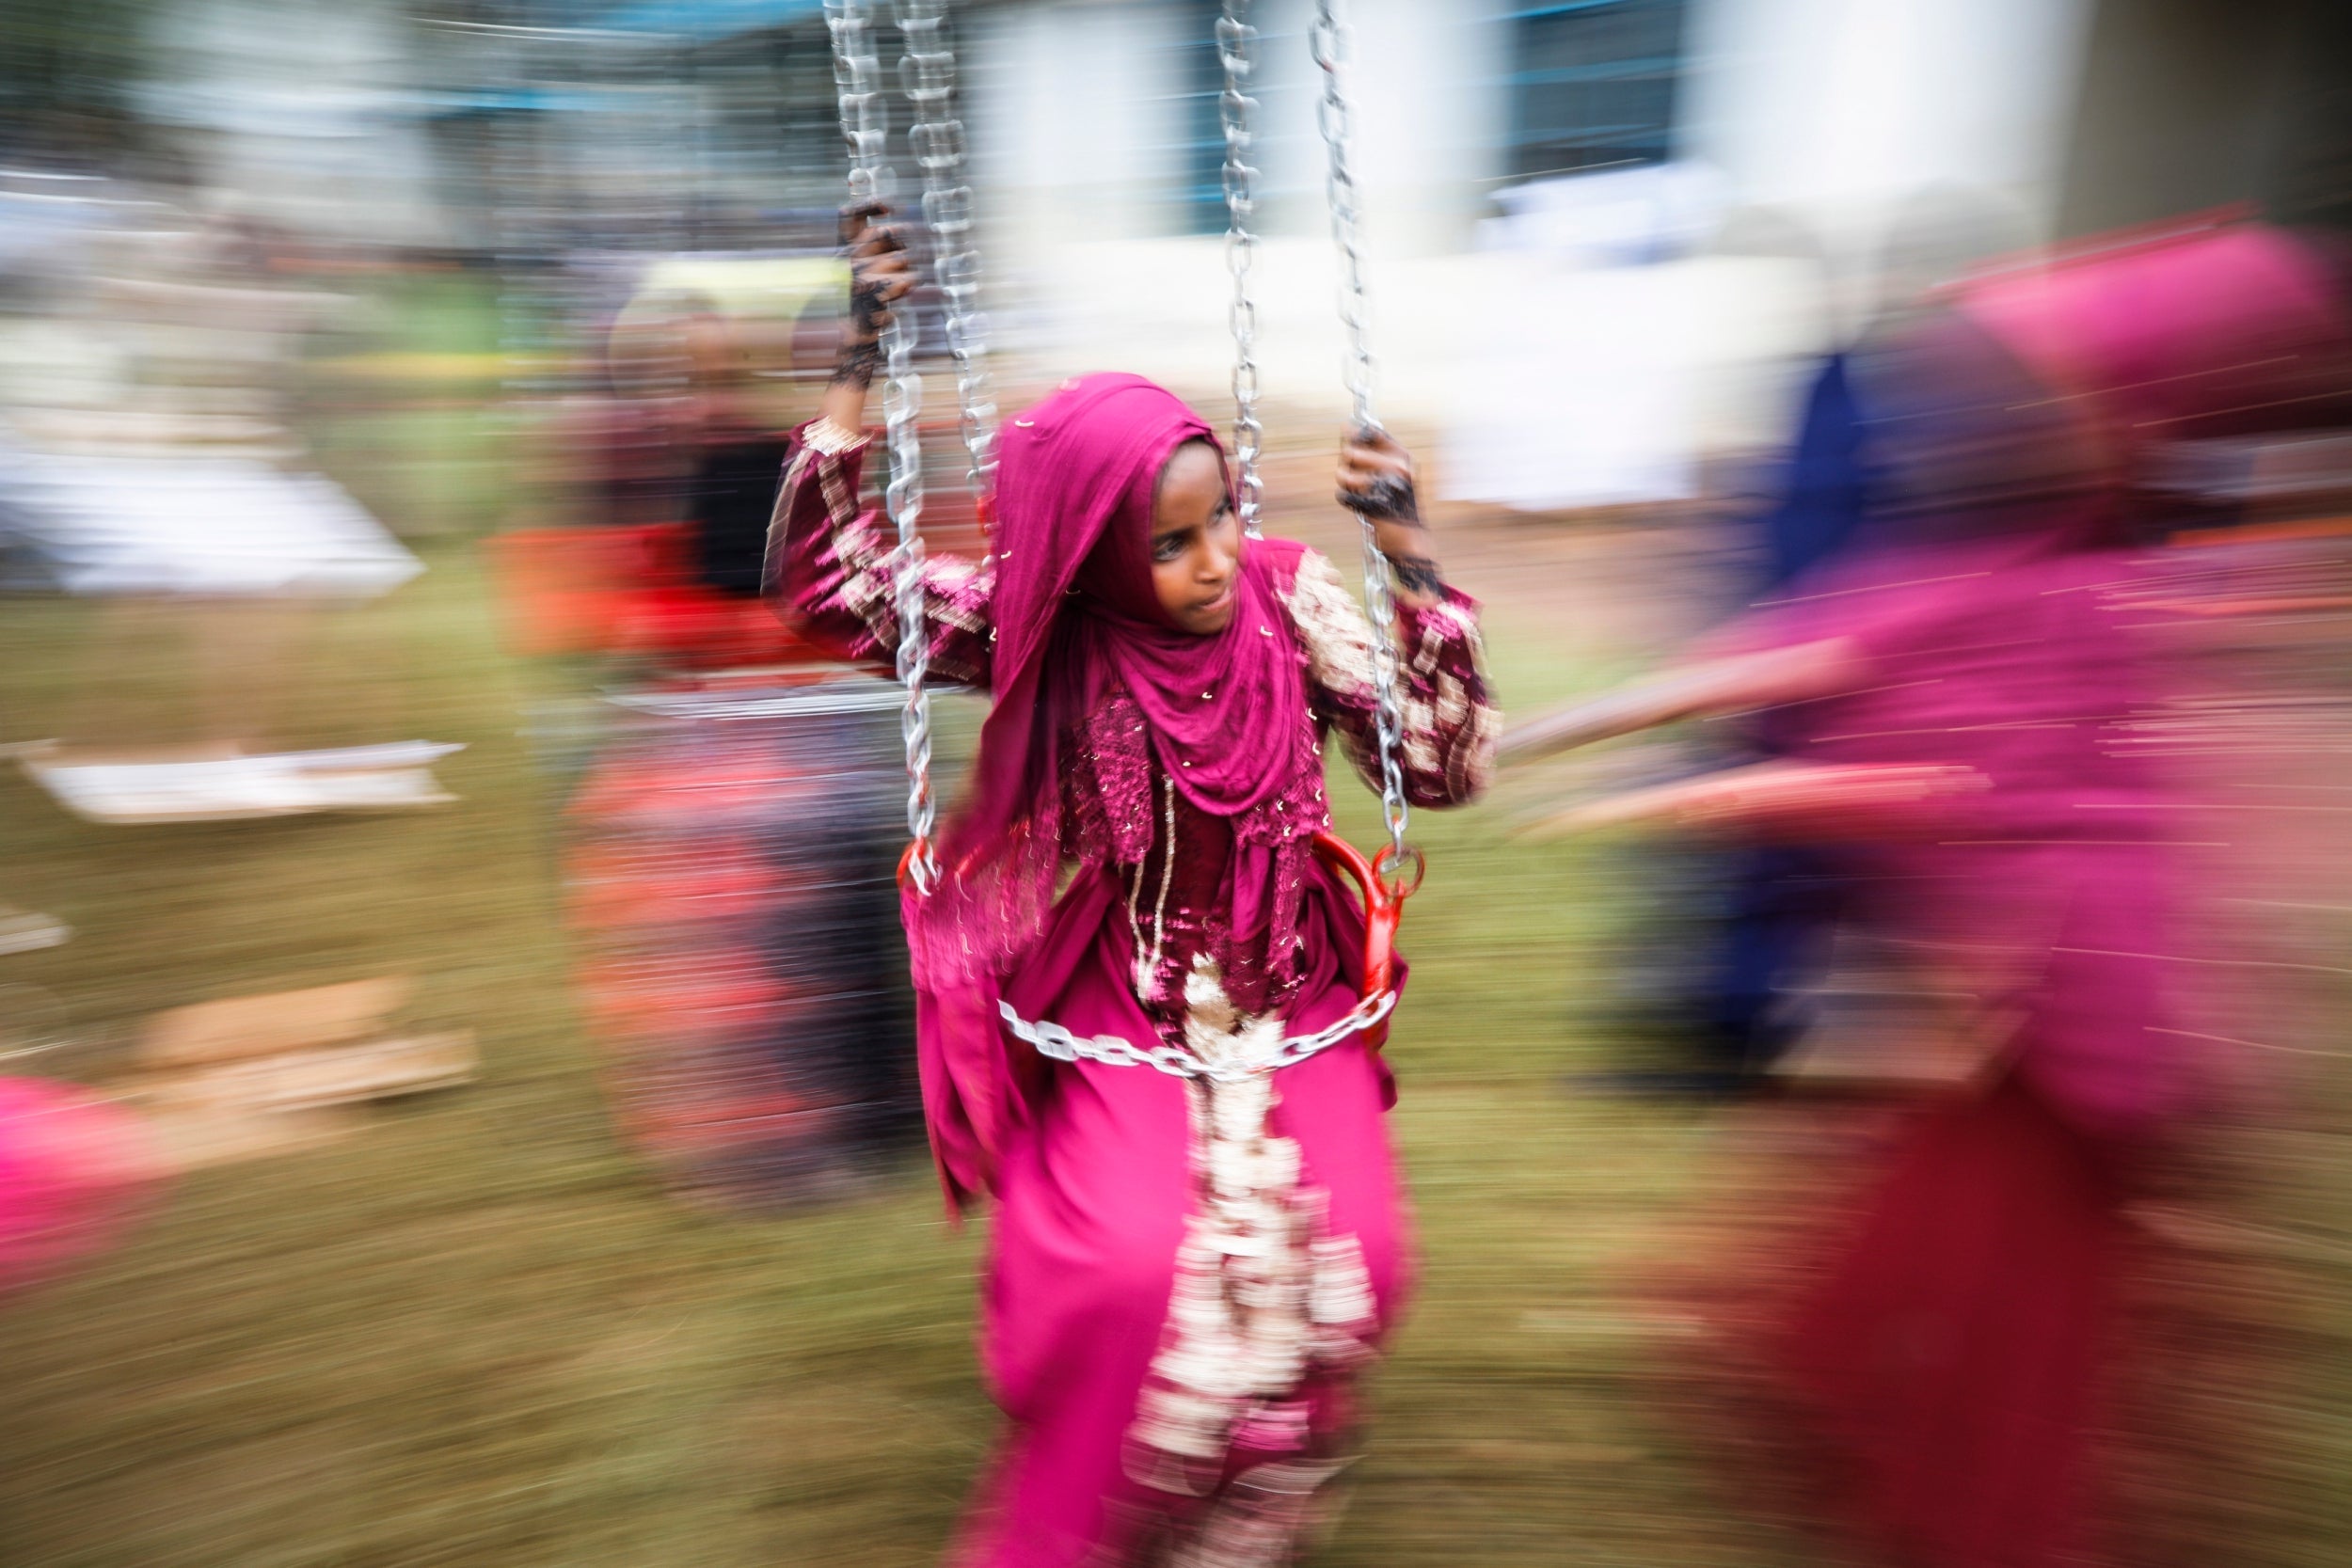 A young Muslim girl enjoys a swing ride during an Eid celebration